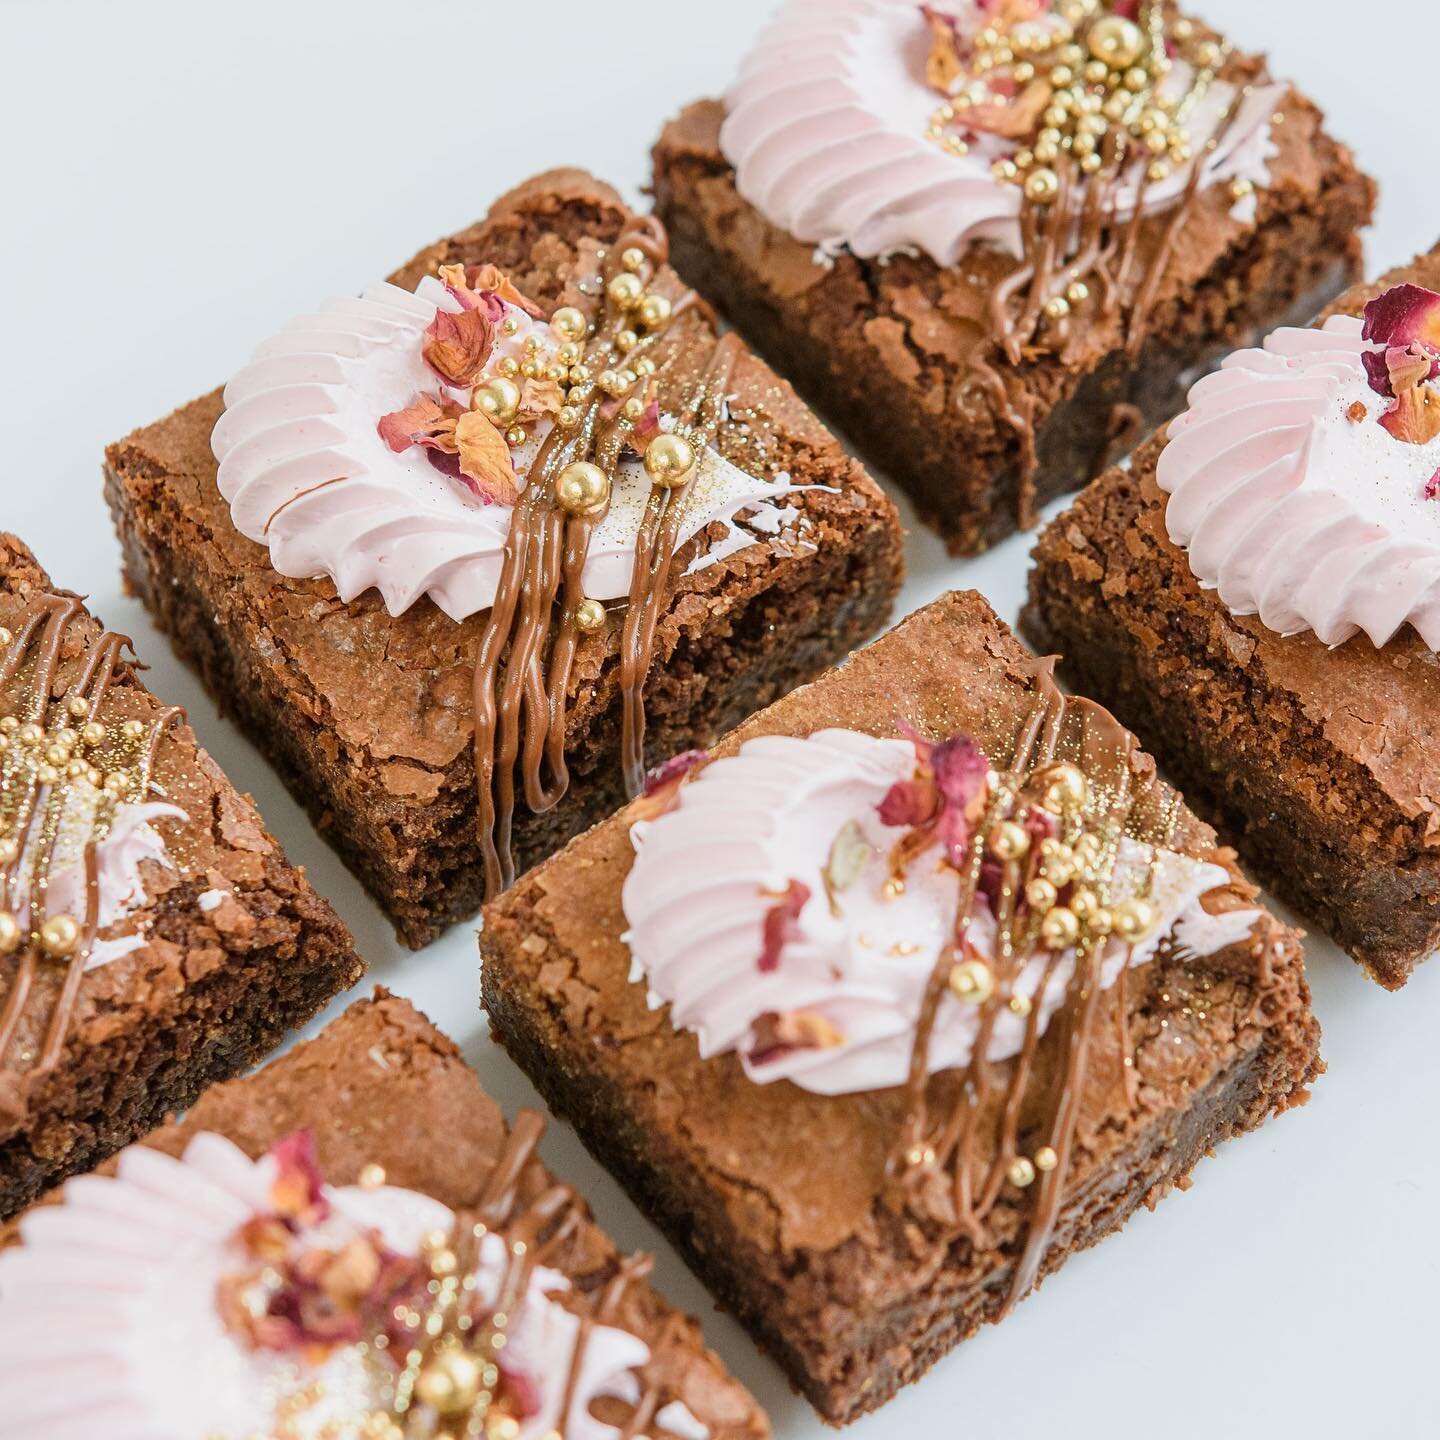 CHEWY CHOCOLATE BROWNIE / if your mumma or the mum figure in your life loves chocolate this is the ONE. This is chewy and rich, but is also gluten free (almond based!). It is also available in a 6 or 12 pack! 

If you&rsquo;re wanting to purchase one